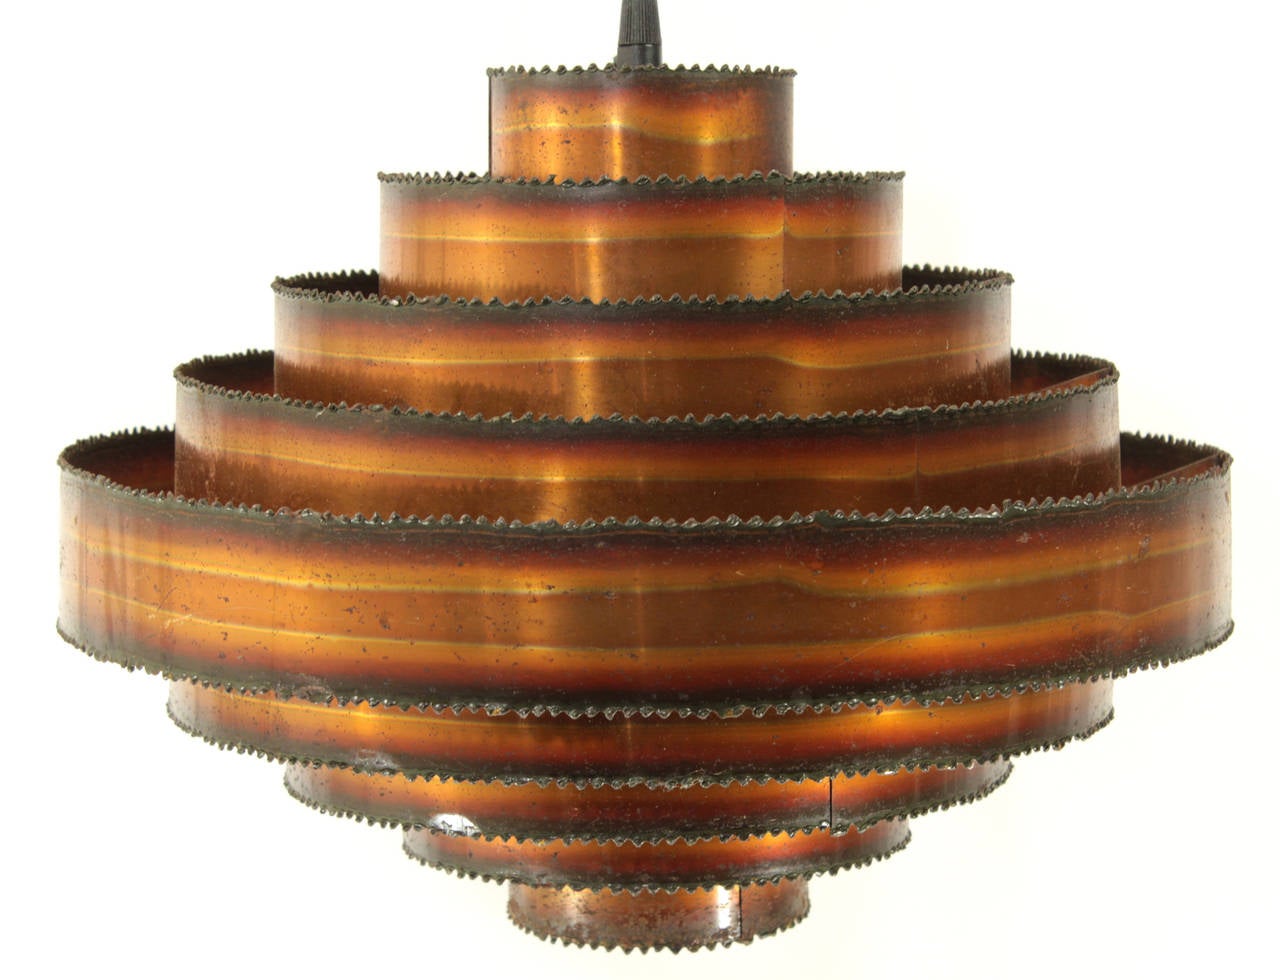 A stunning Mid-Century Brutalist pendant made from bands of copper, artfully patinated and textured with acid, and torch cut to a serrated edge. In excellent vintage condition. Newly re-wired to U.S. standards and includes new black canopy and all